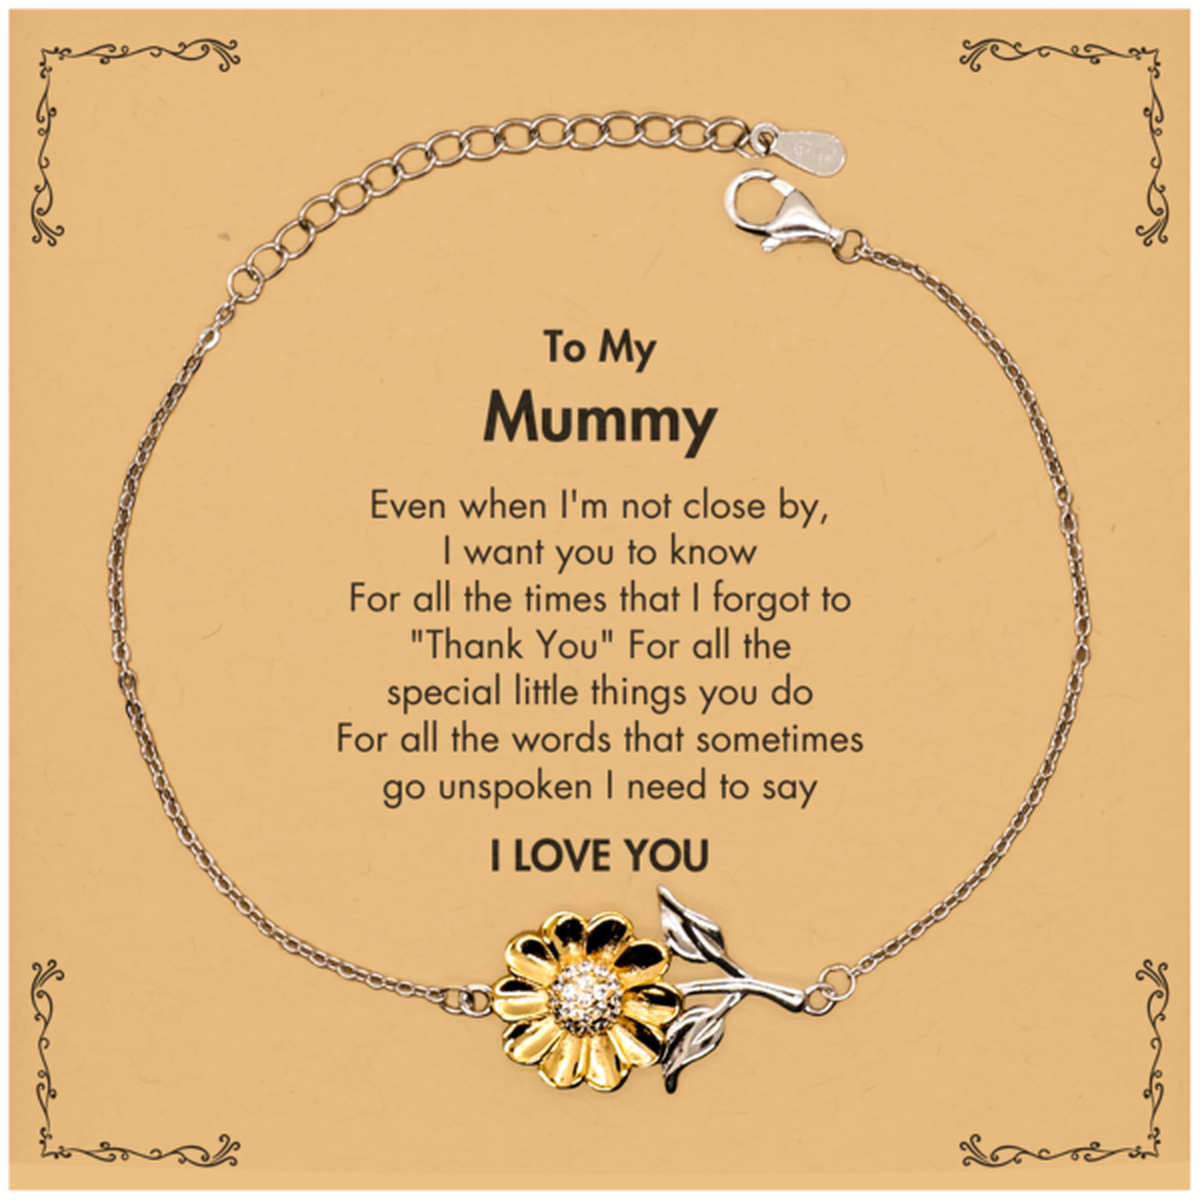 Thank You Gifts for Mummy, Keepsake Sunflower Bracelet Gifts for Mummy Birthday Mother's day Father's Day Mummy For all the words That sometimes go unspoken I need to say I LOVE YOU